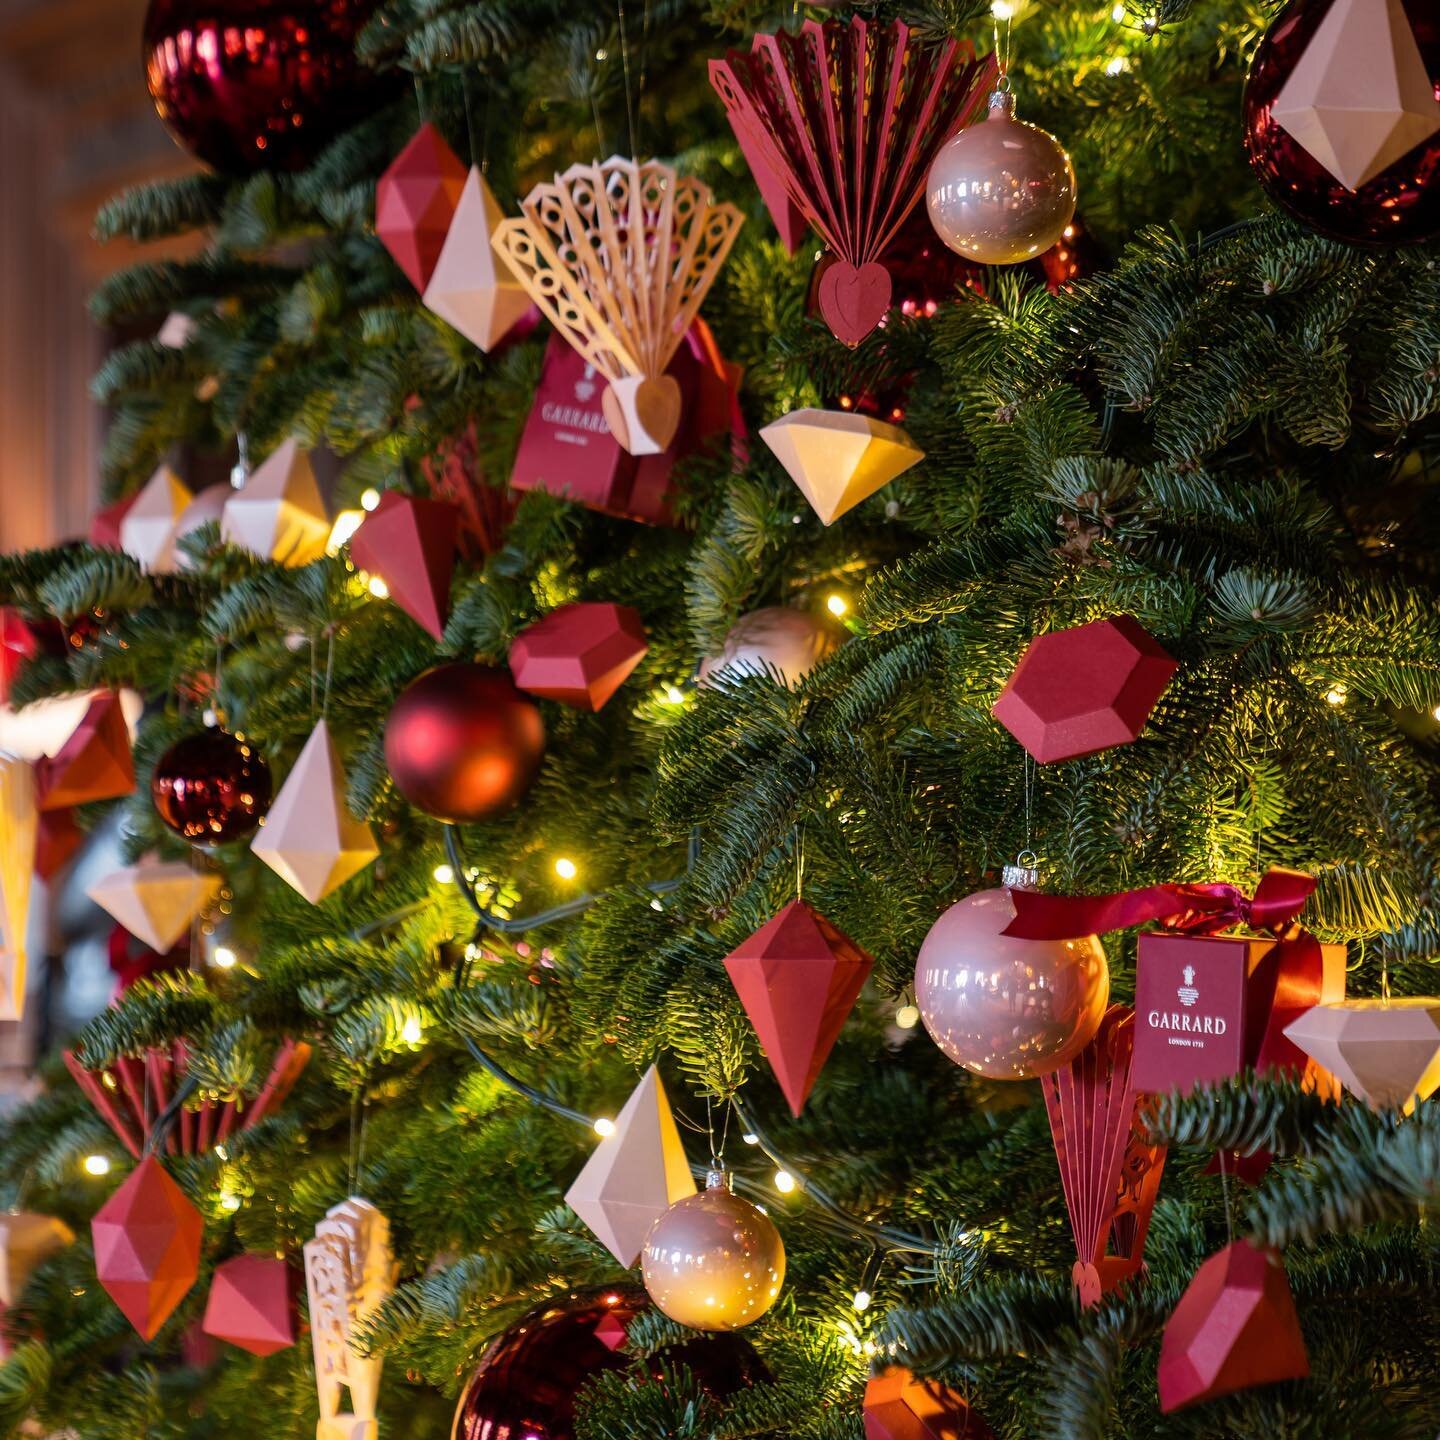 The House of Garrard X Cliveden house christmas tree decorations include over 500 handmade faceted paper jewels and fans inspired by the Garrard fine jewellery pieces. Design, production and installation by @hwvisual